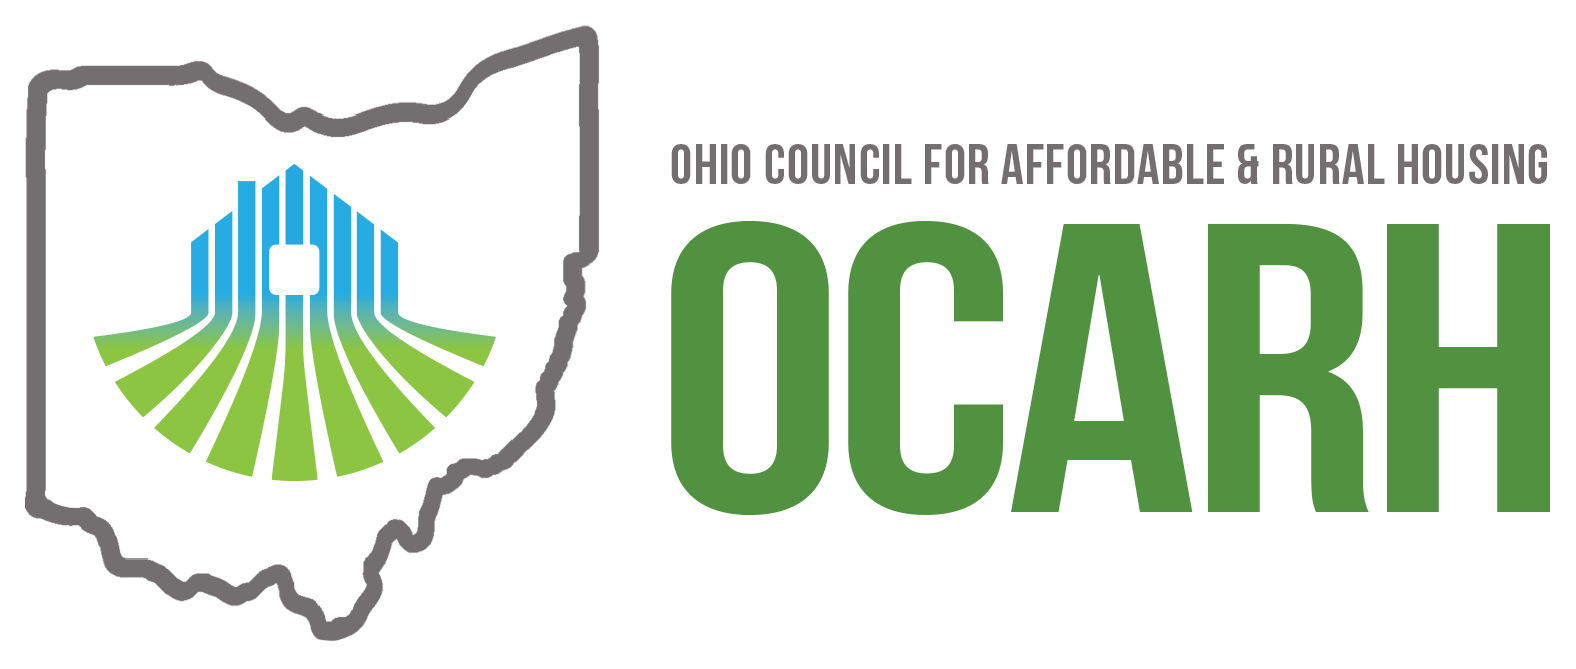 Ohio Council for Affordable and Rural Housing (OCARH)